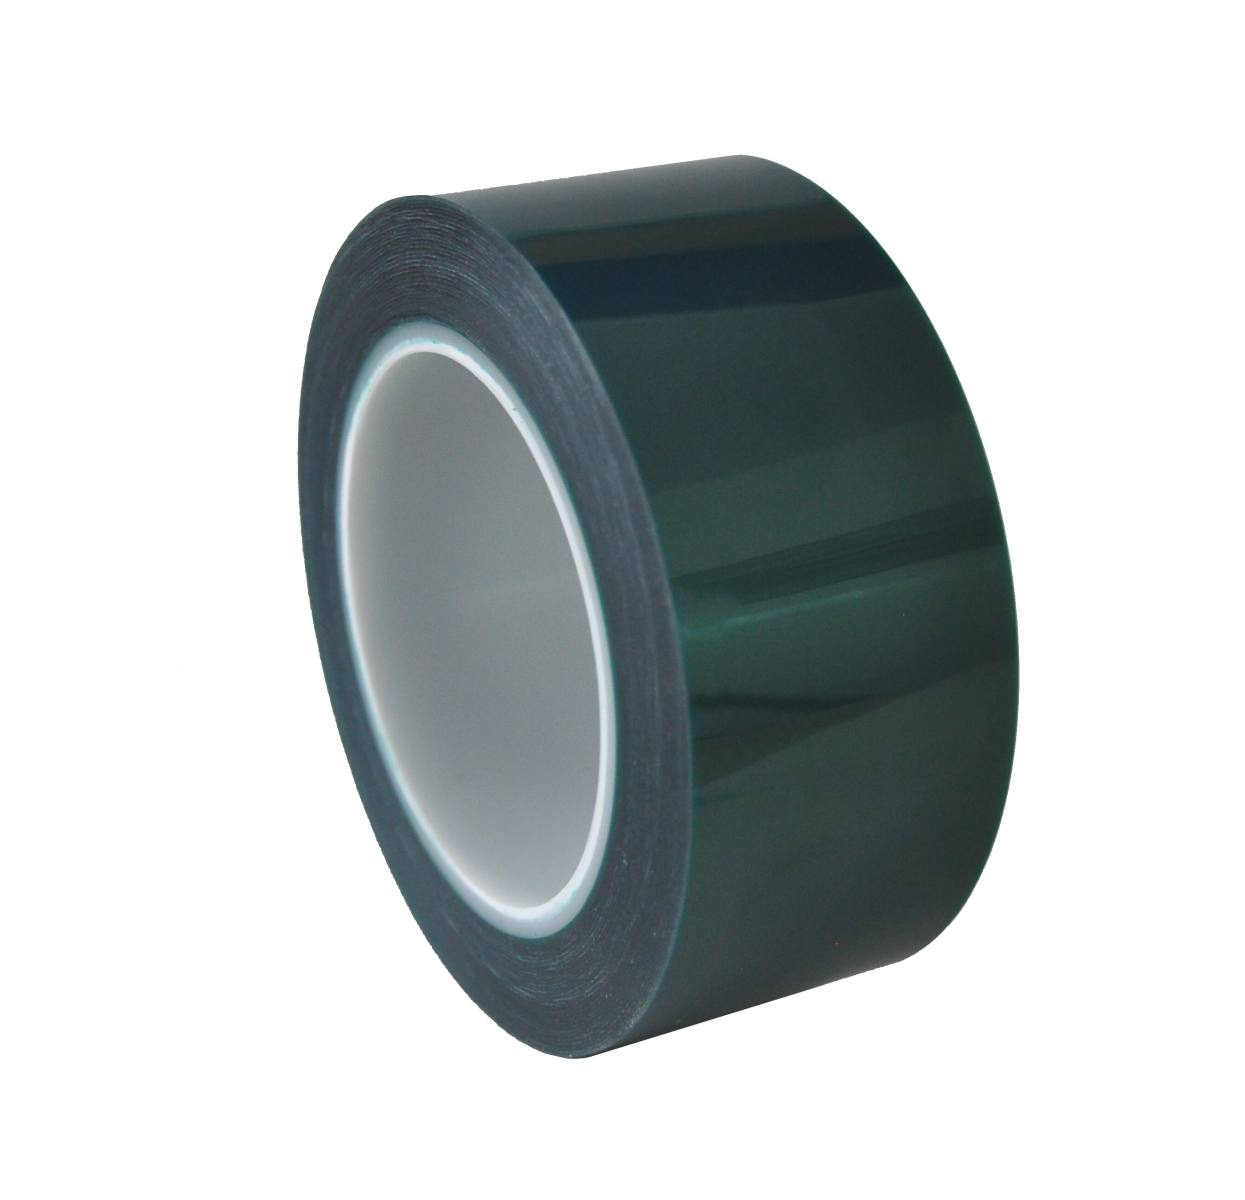 S-K-S 208G polyester adhesive tape, 12mmx66m, green